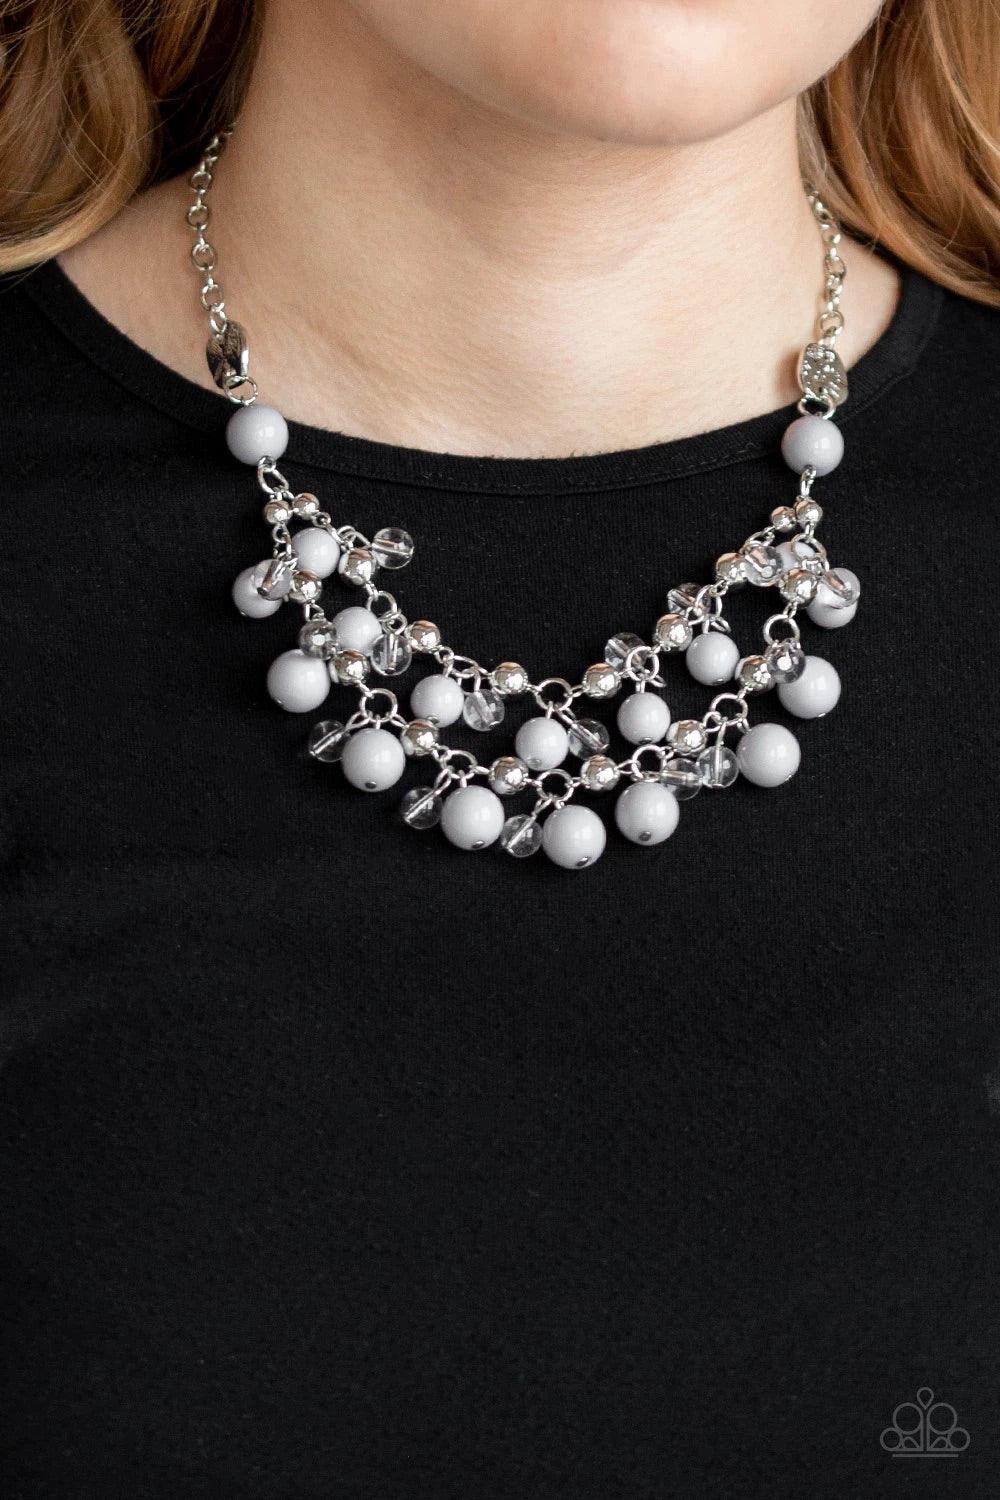 Paparazzi Accessories Seaside Soirée - Silver Hammered silver discs give way to layers of polished gray, glassy, and shiny silver beads. The colorful collection layers below the collar, creating a bubbly fringe. Features an adjustable clasp closure. Sold